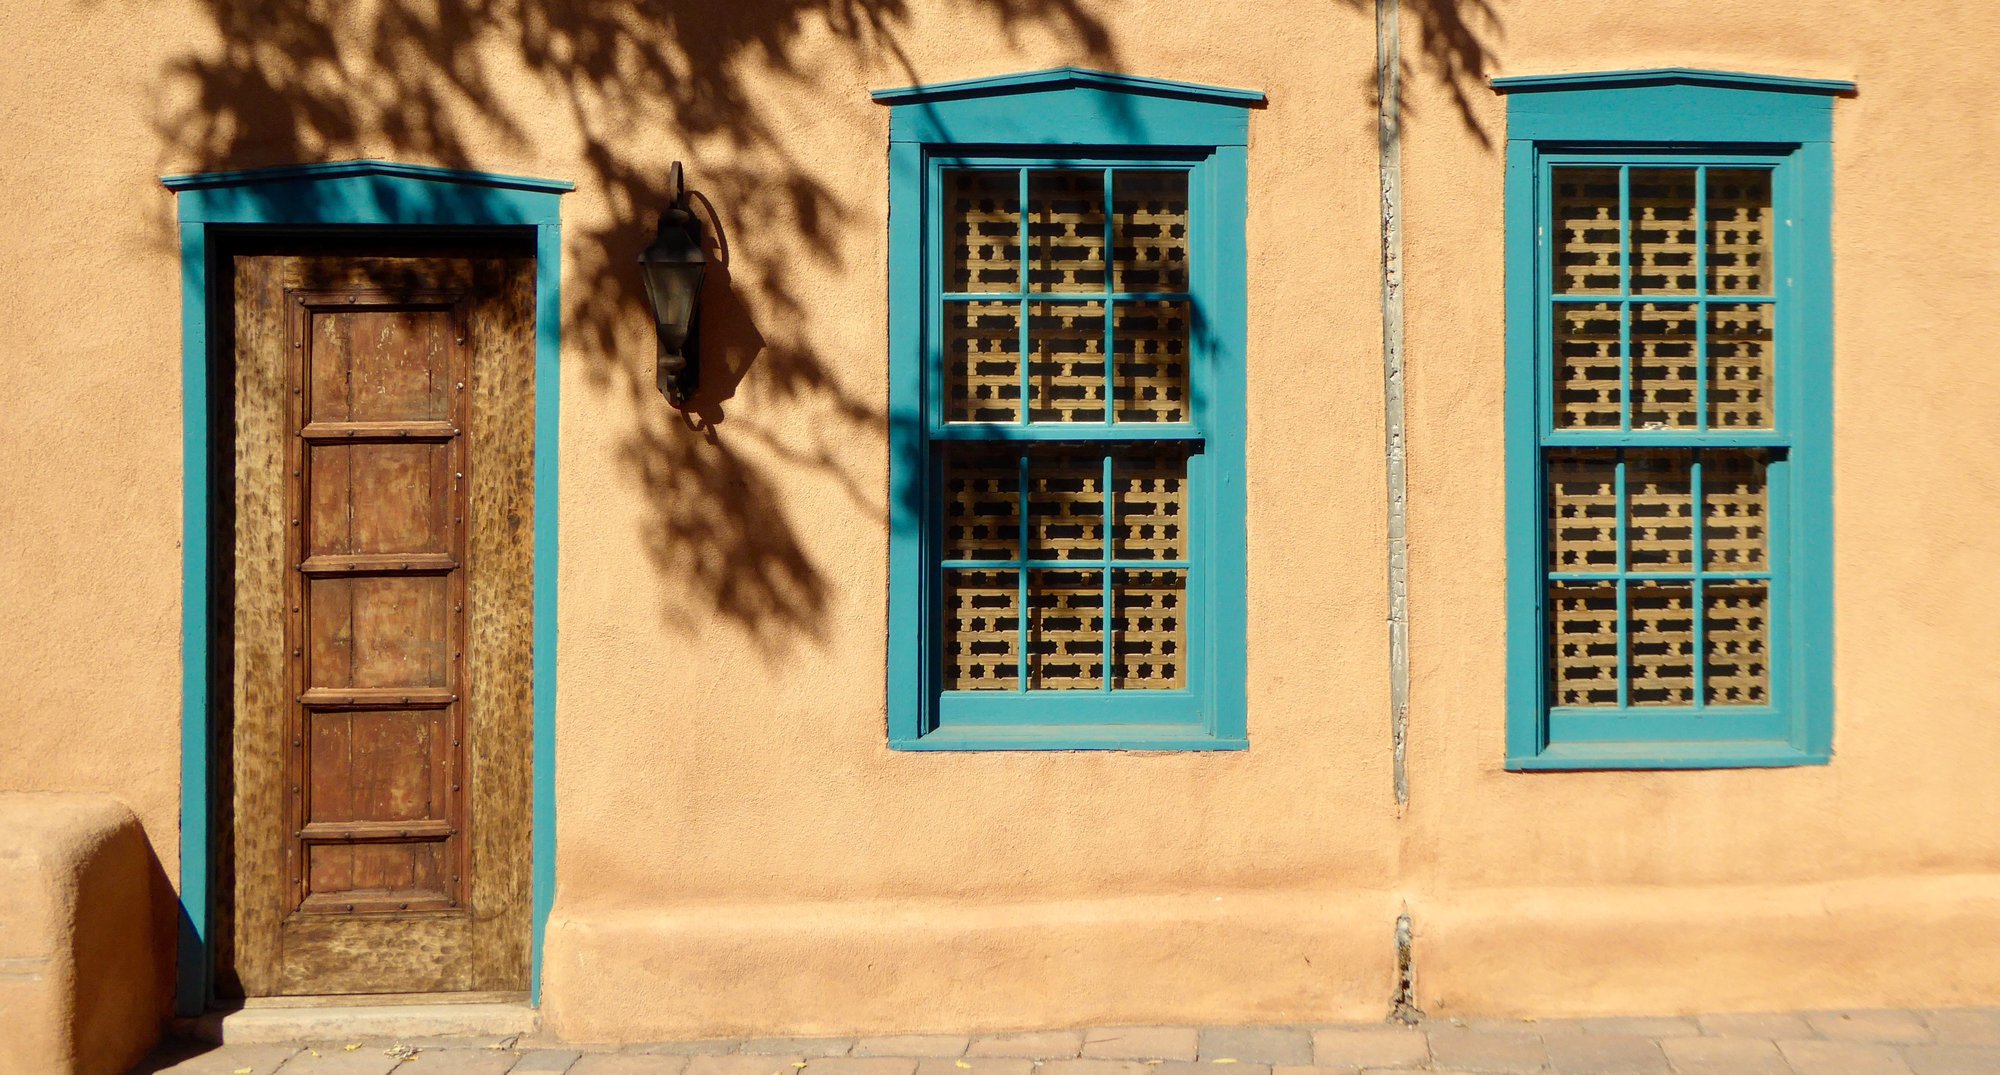 Building with blue trimmed door and windows in Santa Fe, New Mexico.